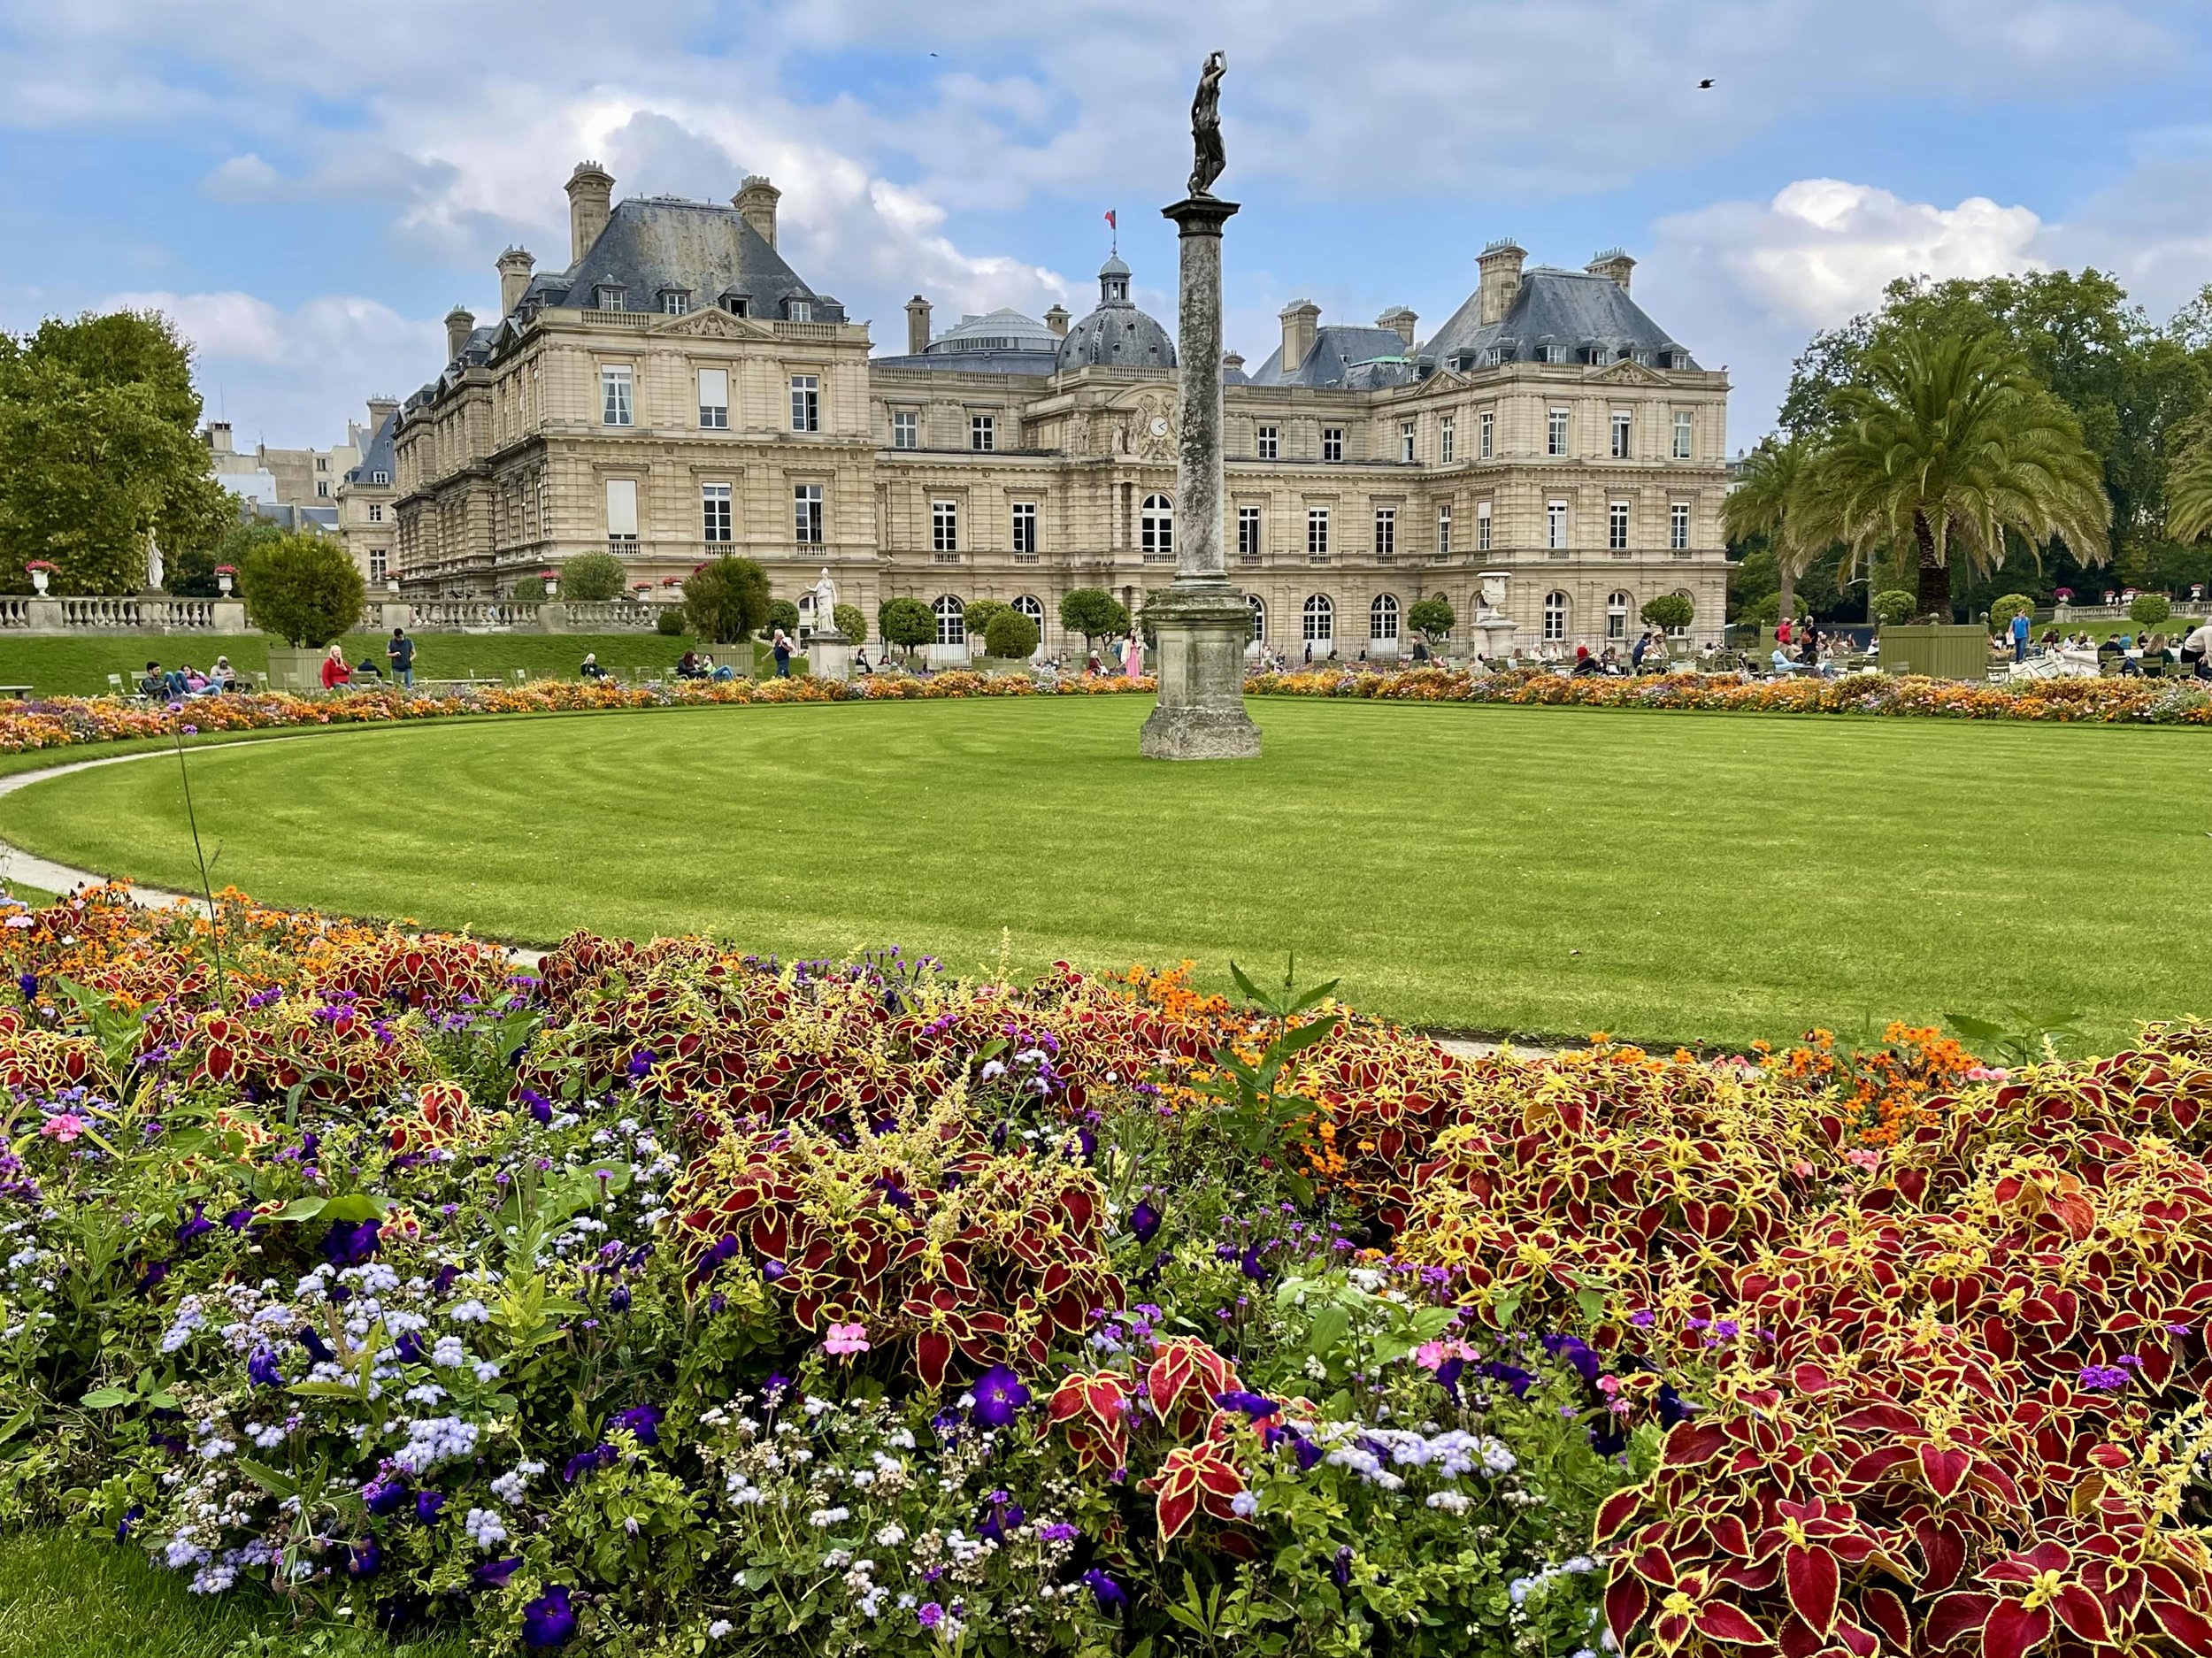 The Luxembourg Gardens are just steps away from Le Café Tournon, the favored café in Paris for African American writers of the 1950’s